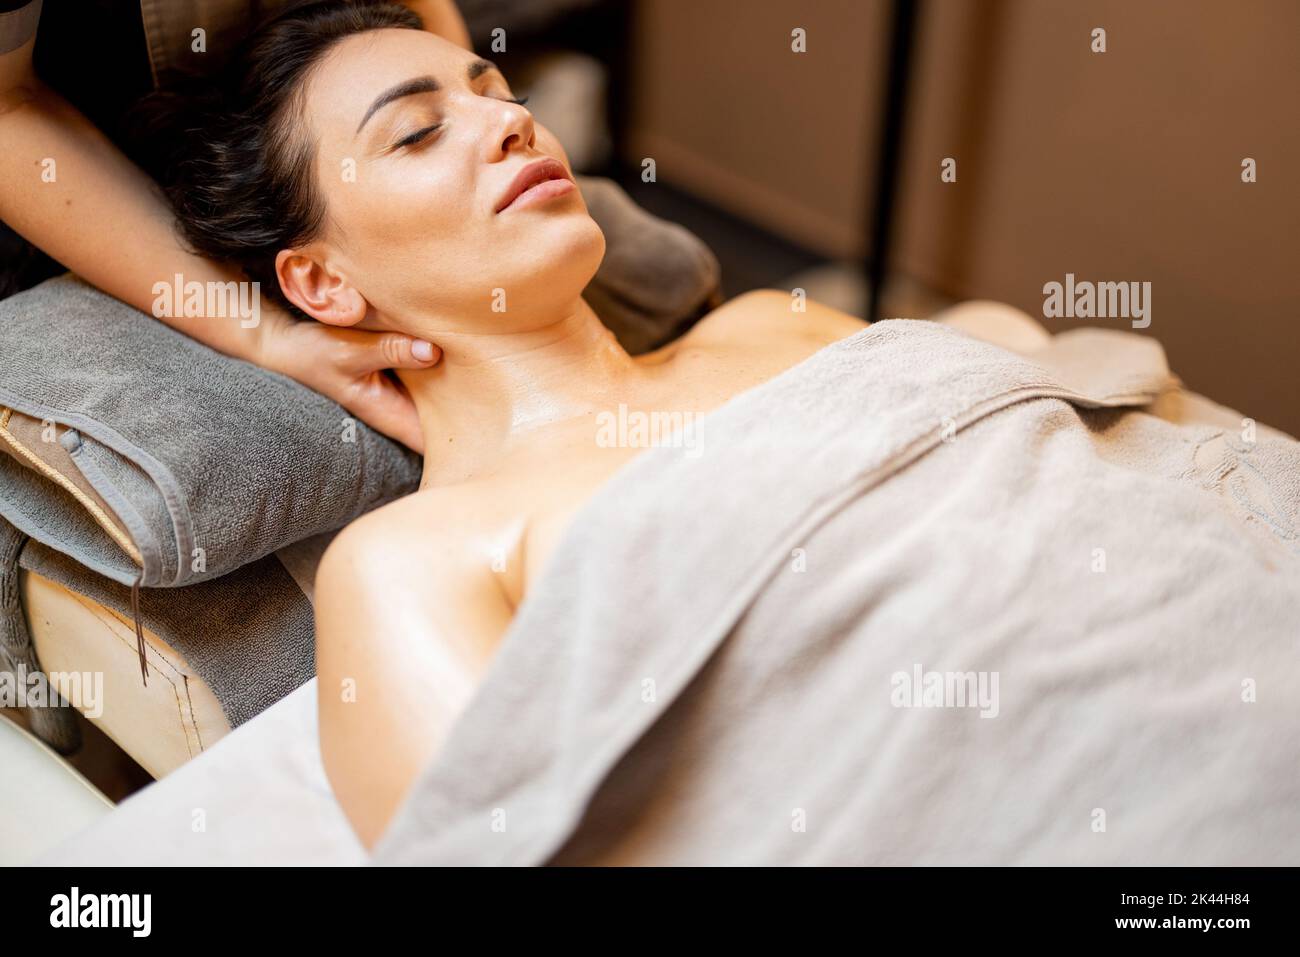 Woman receiving relaxation neck massage Stock Photo